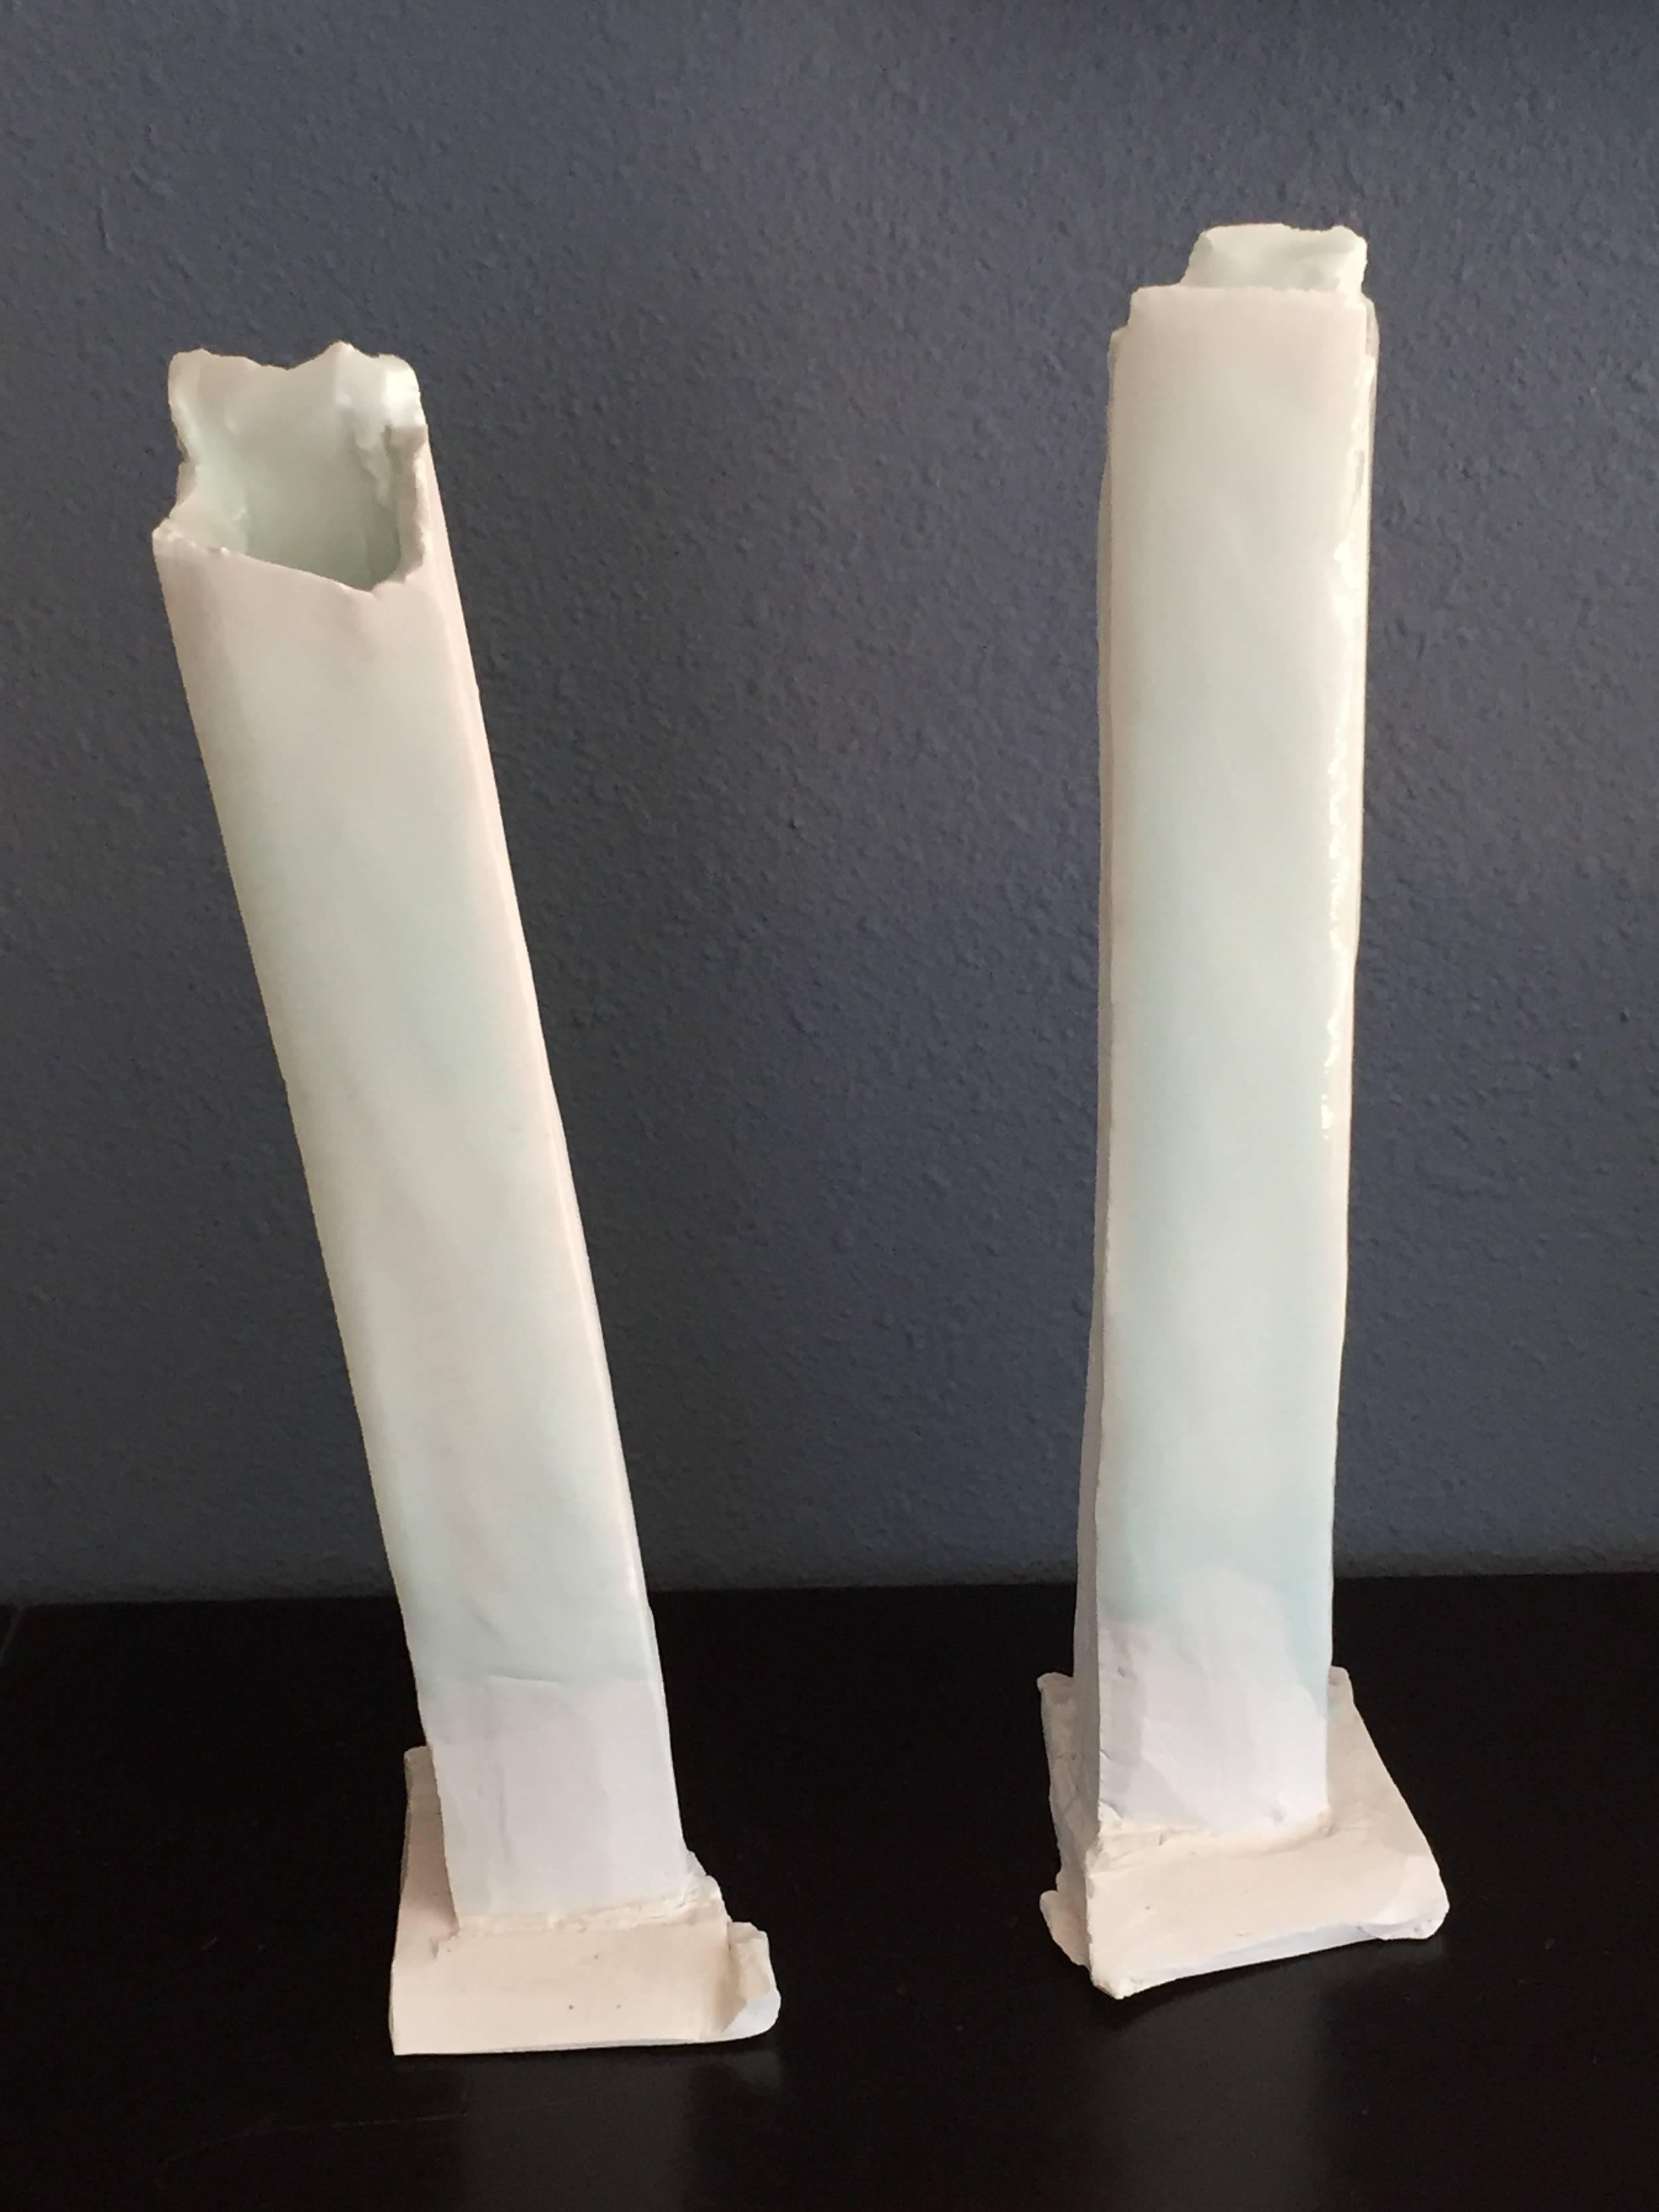 Hand-Crafted Pair of Contemporary Porcelain Vases by Kato Tsubusa For Sale